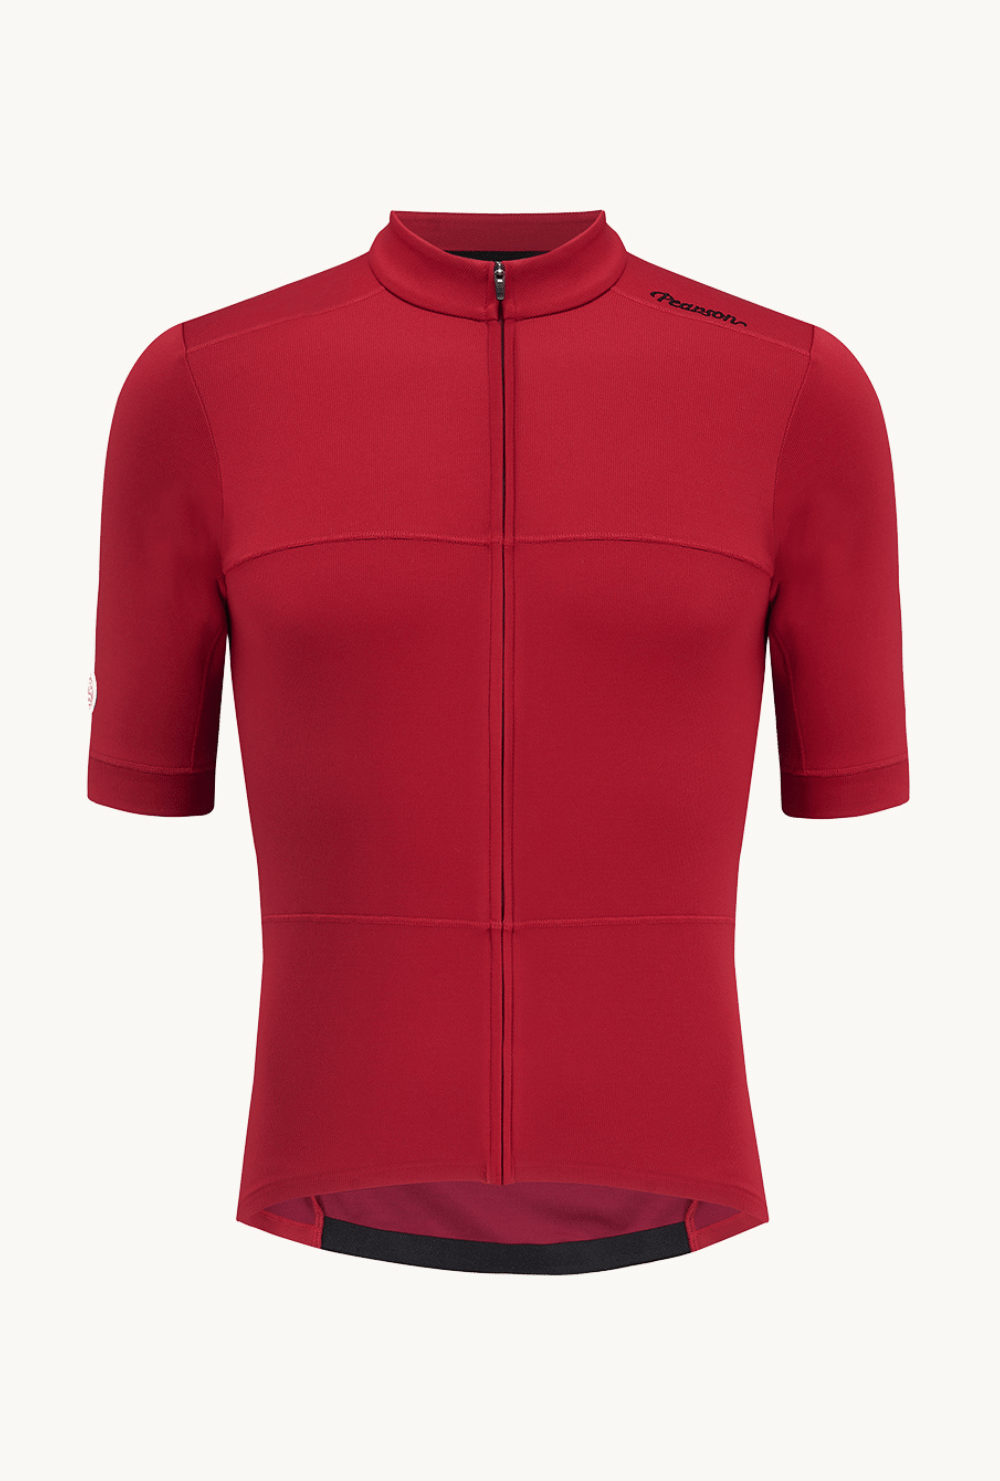 Pearson 1860  To Brighton - Road Short Sleeve Merino Sportwool Jersey  Small / Red